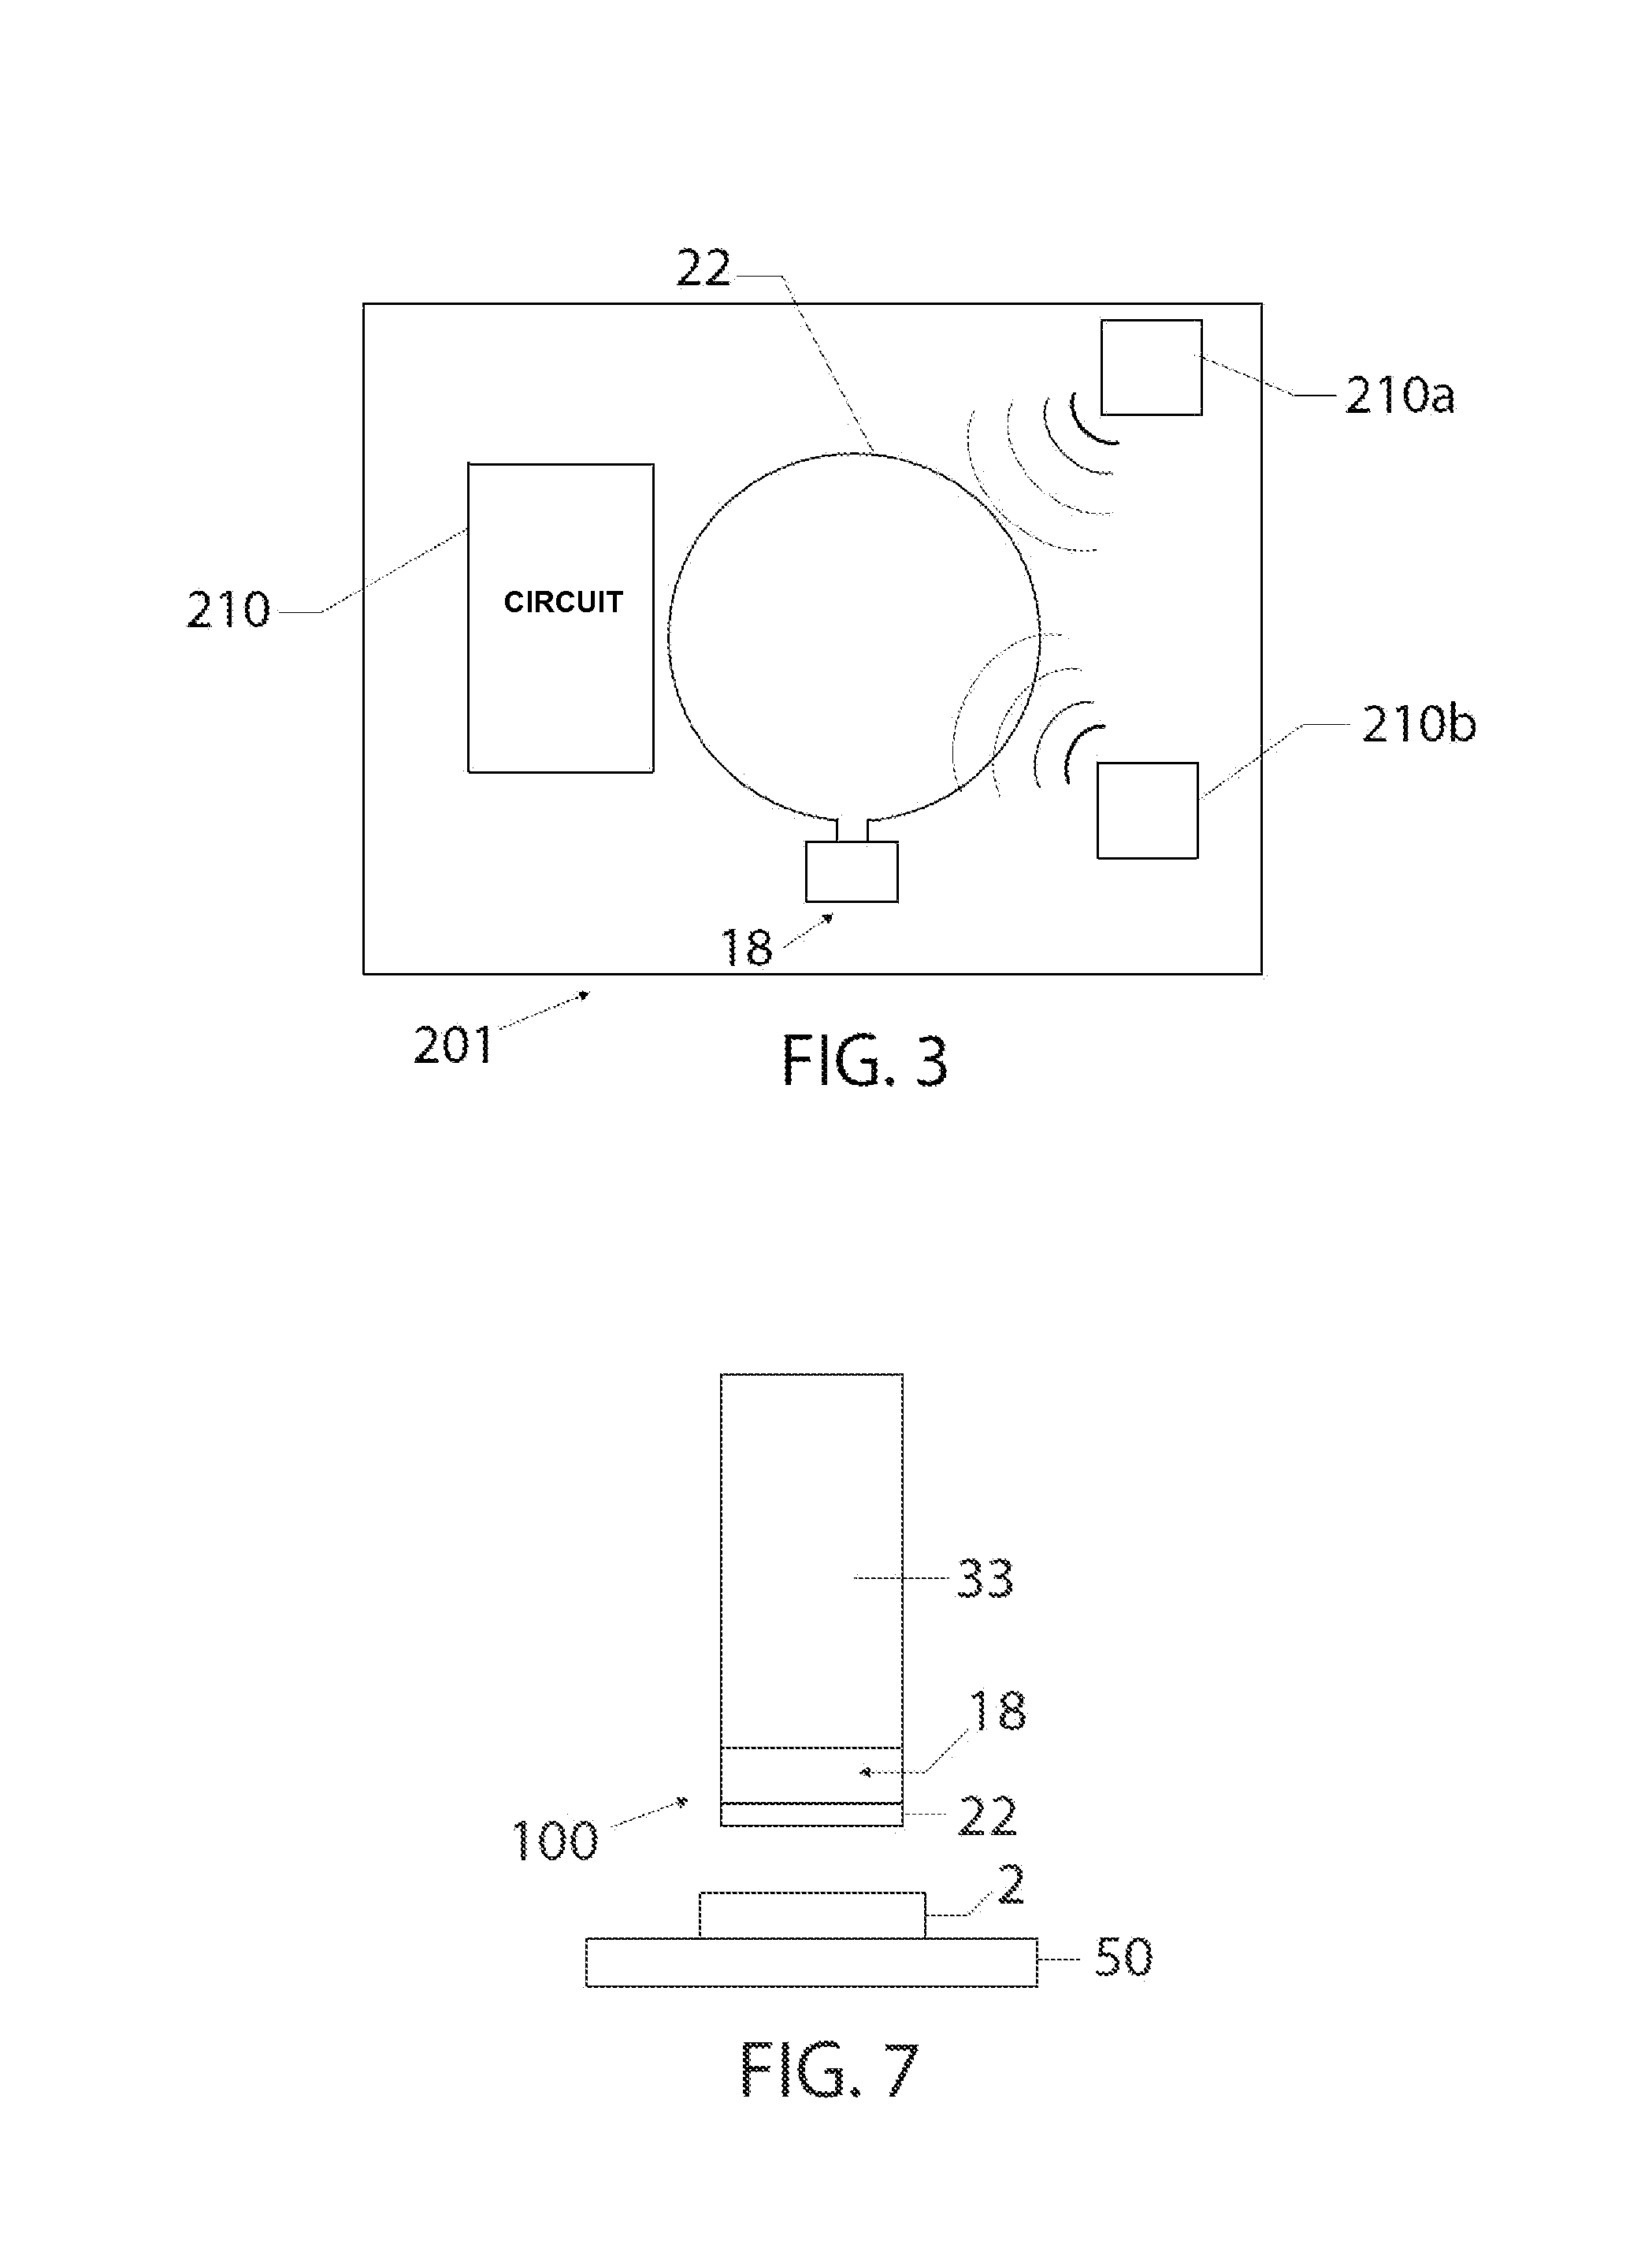 Integrated circuit with electromagnetic energy anomaly detection and processing